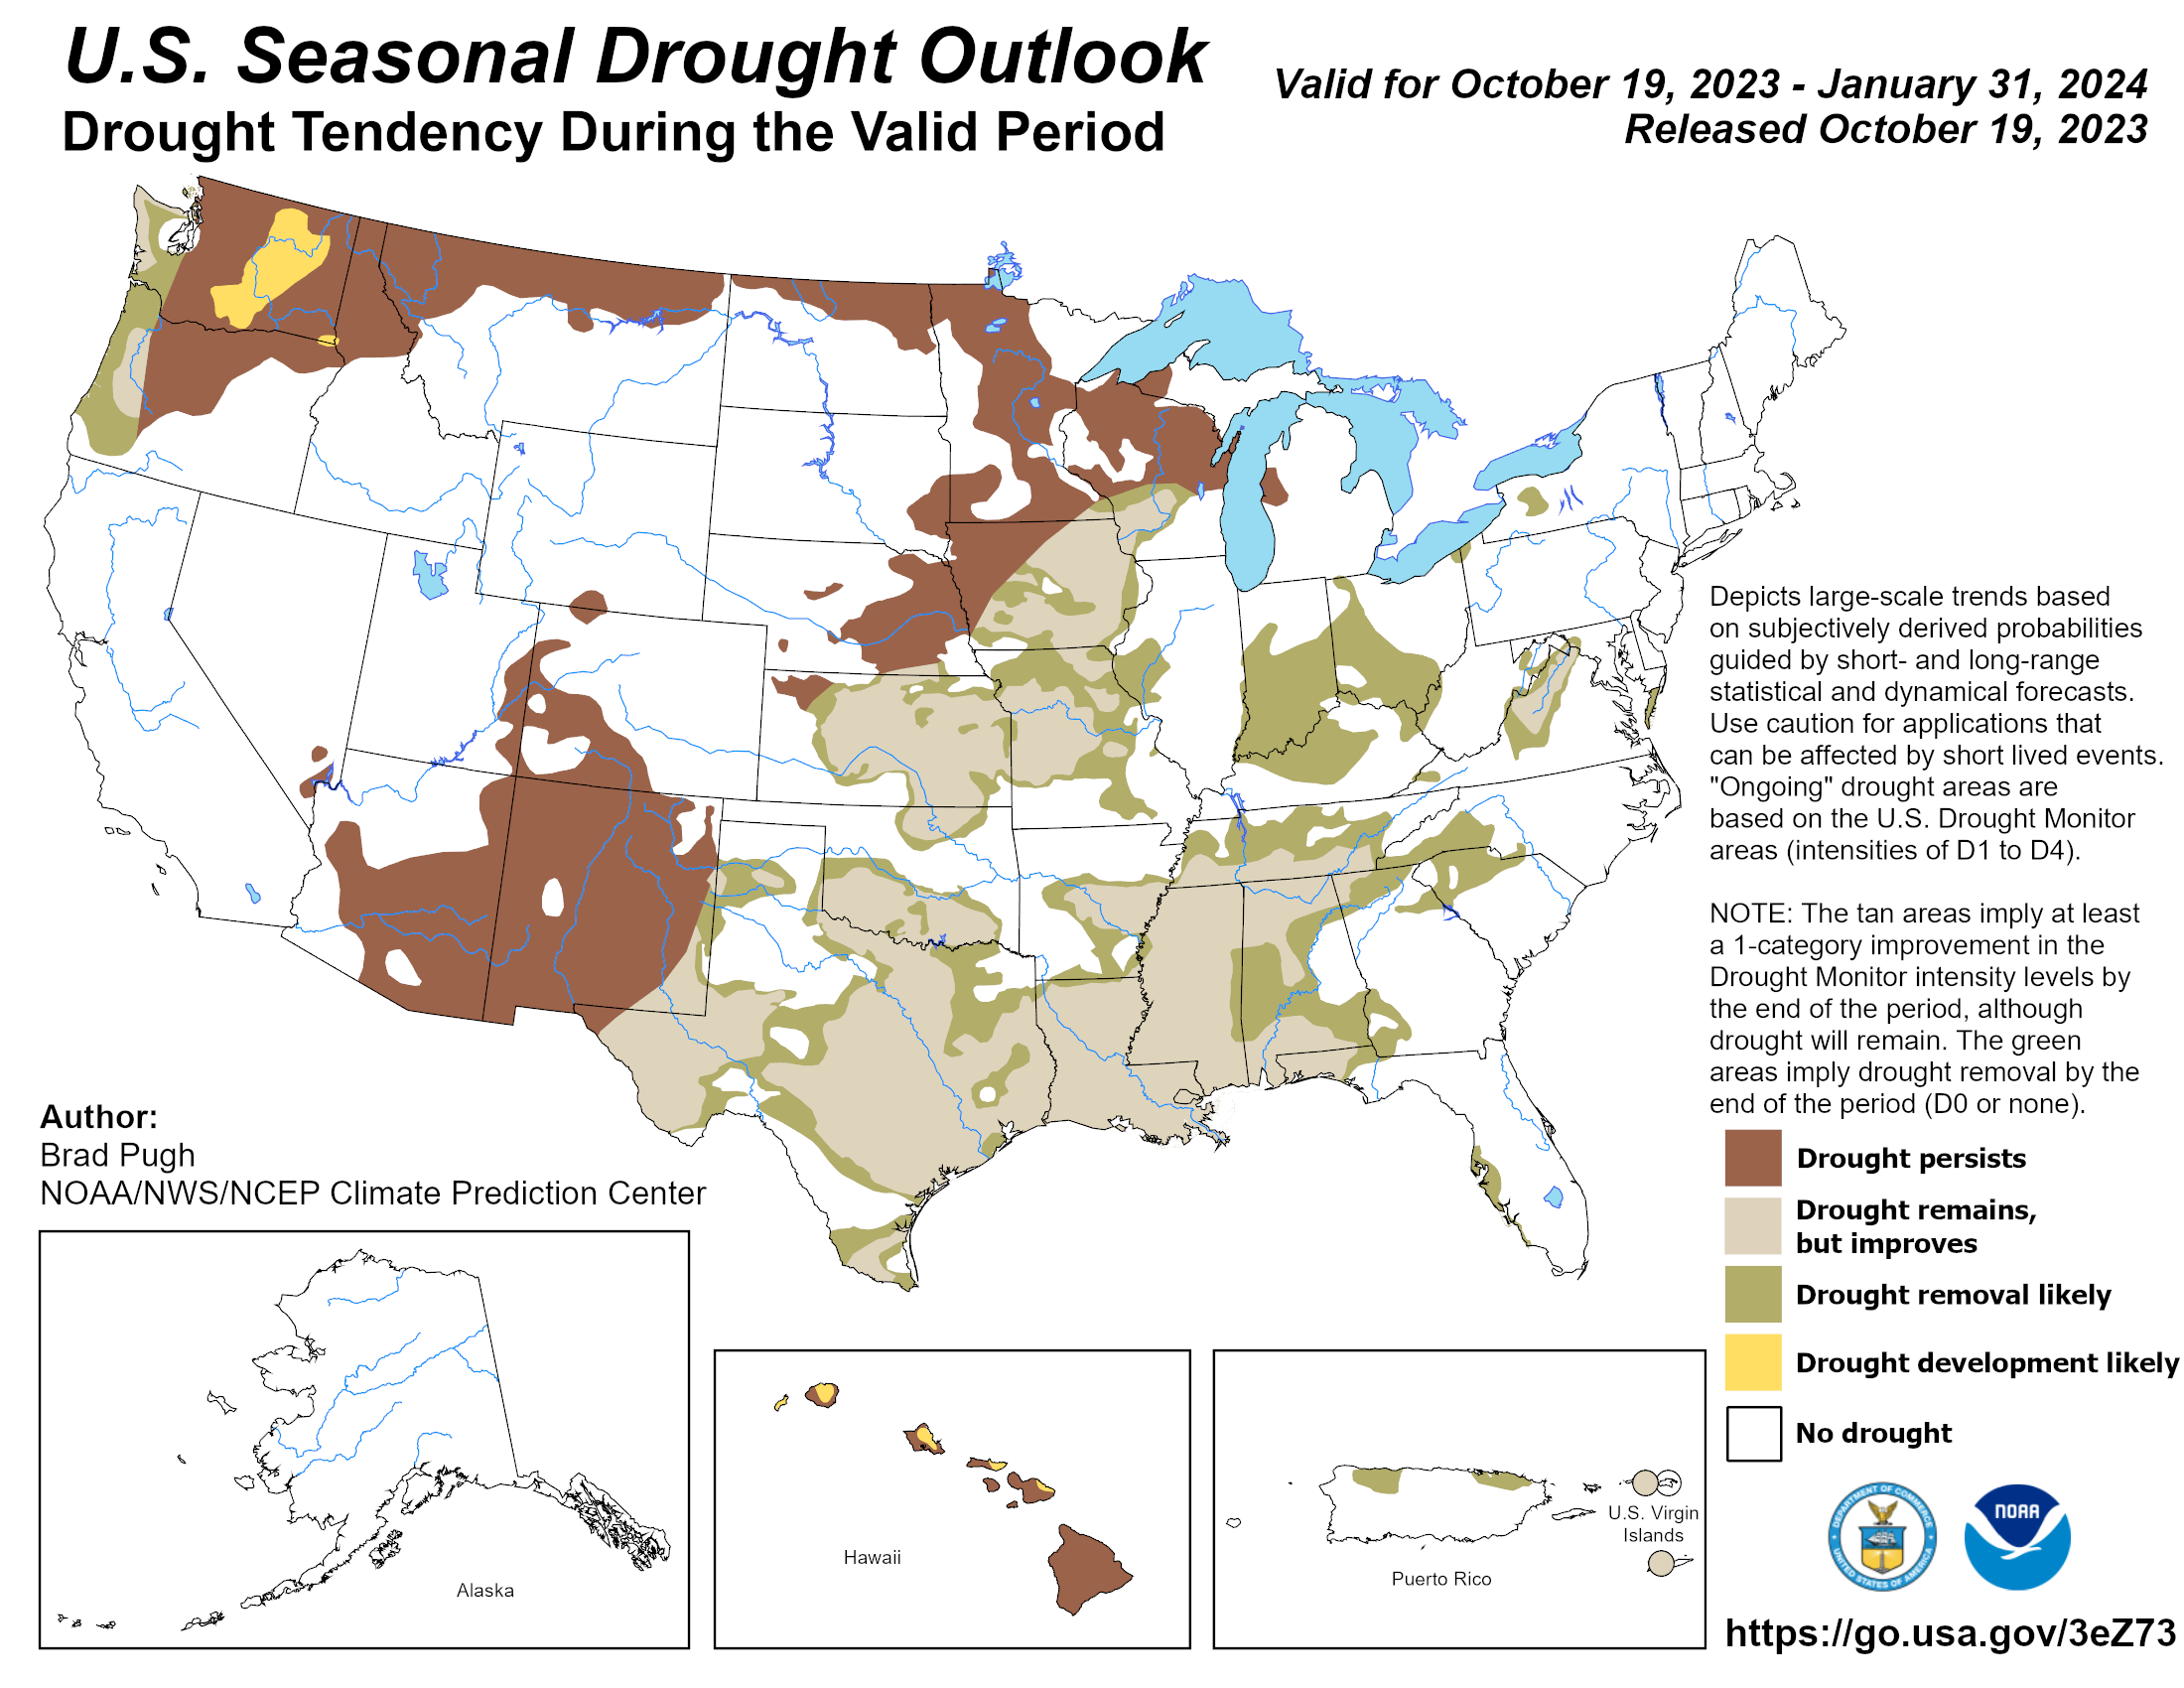 Image showing the U.S. Drought Outlook map for November 2023 through January 2024 predicts drought improvement in the South, lower Mississippi Valley, Texas and parts of the Midwest. Drought is likely to persist in portions of the desert Southwest, in parts of the Pacific Northwest eastward along the northern tier to the Great Lakes, and across Hawaii. Drought development is expected in the interior Pacific Northwest.